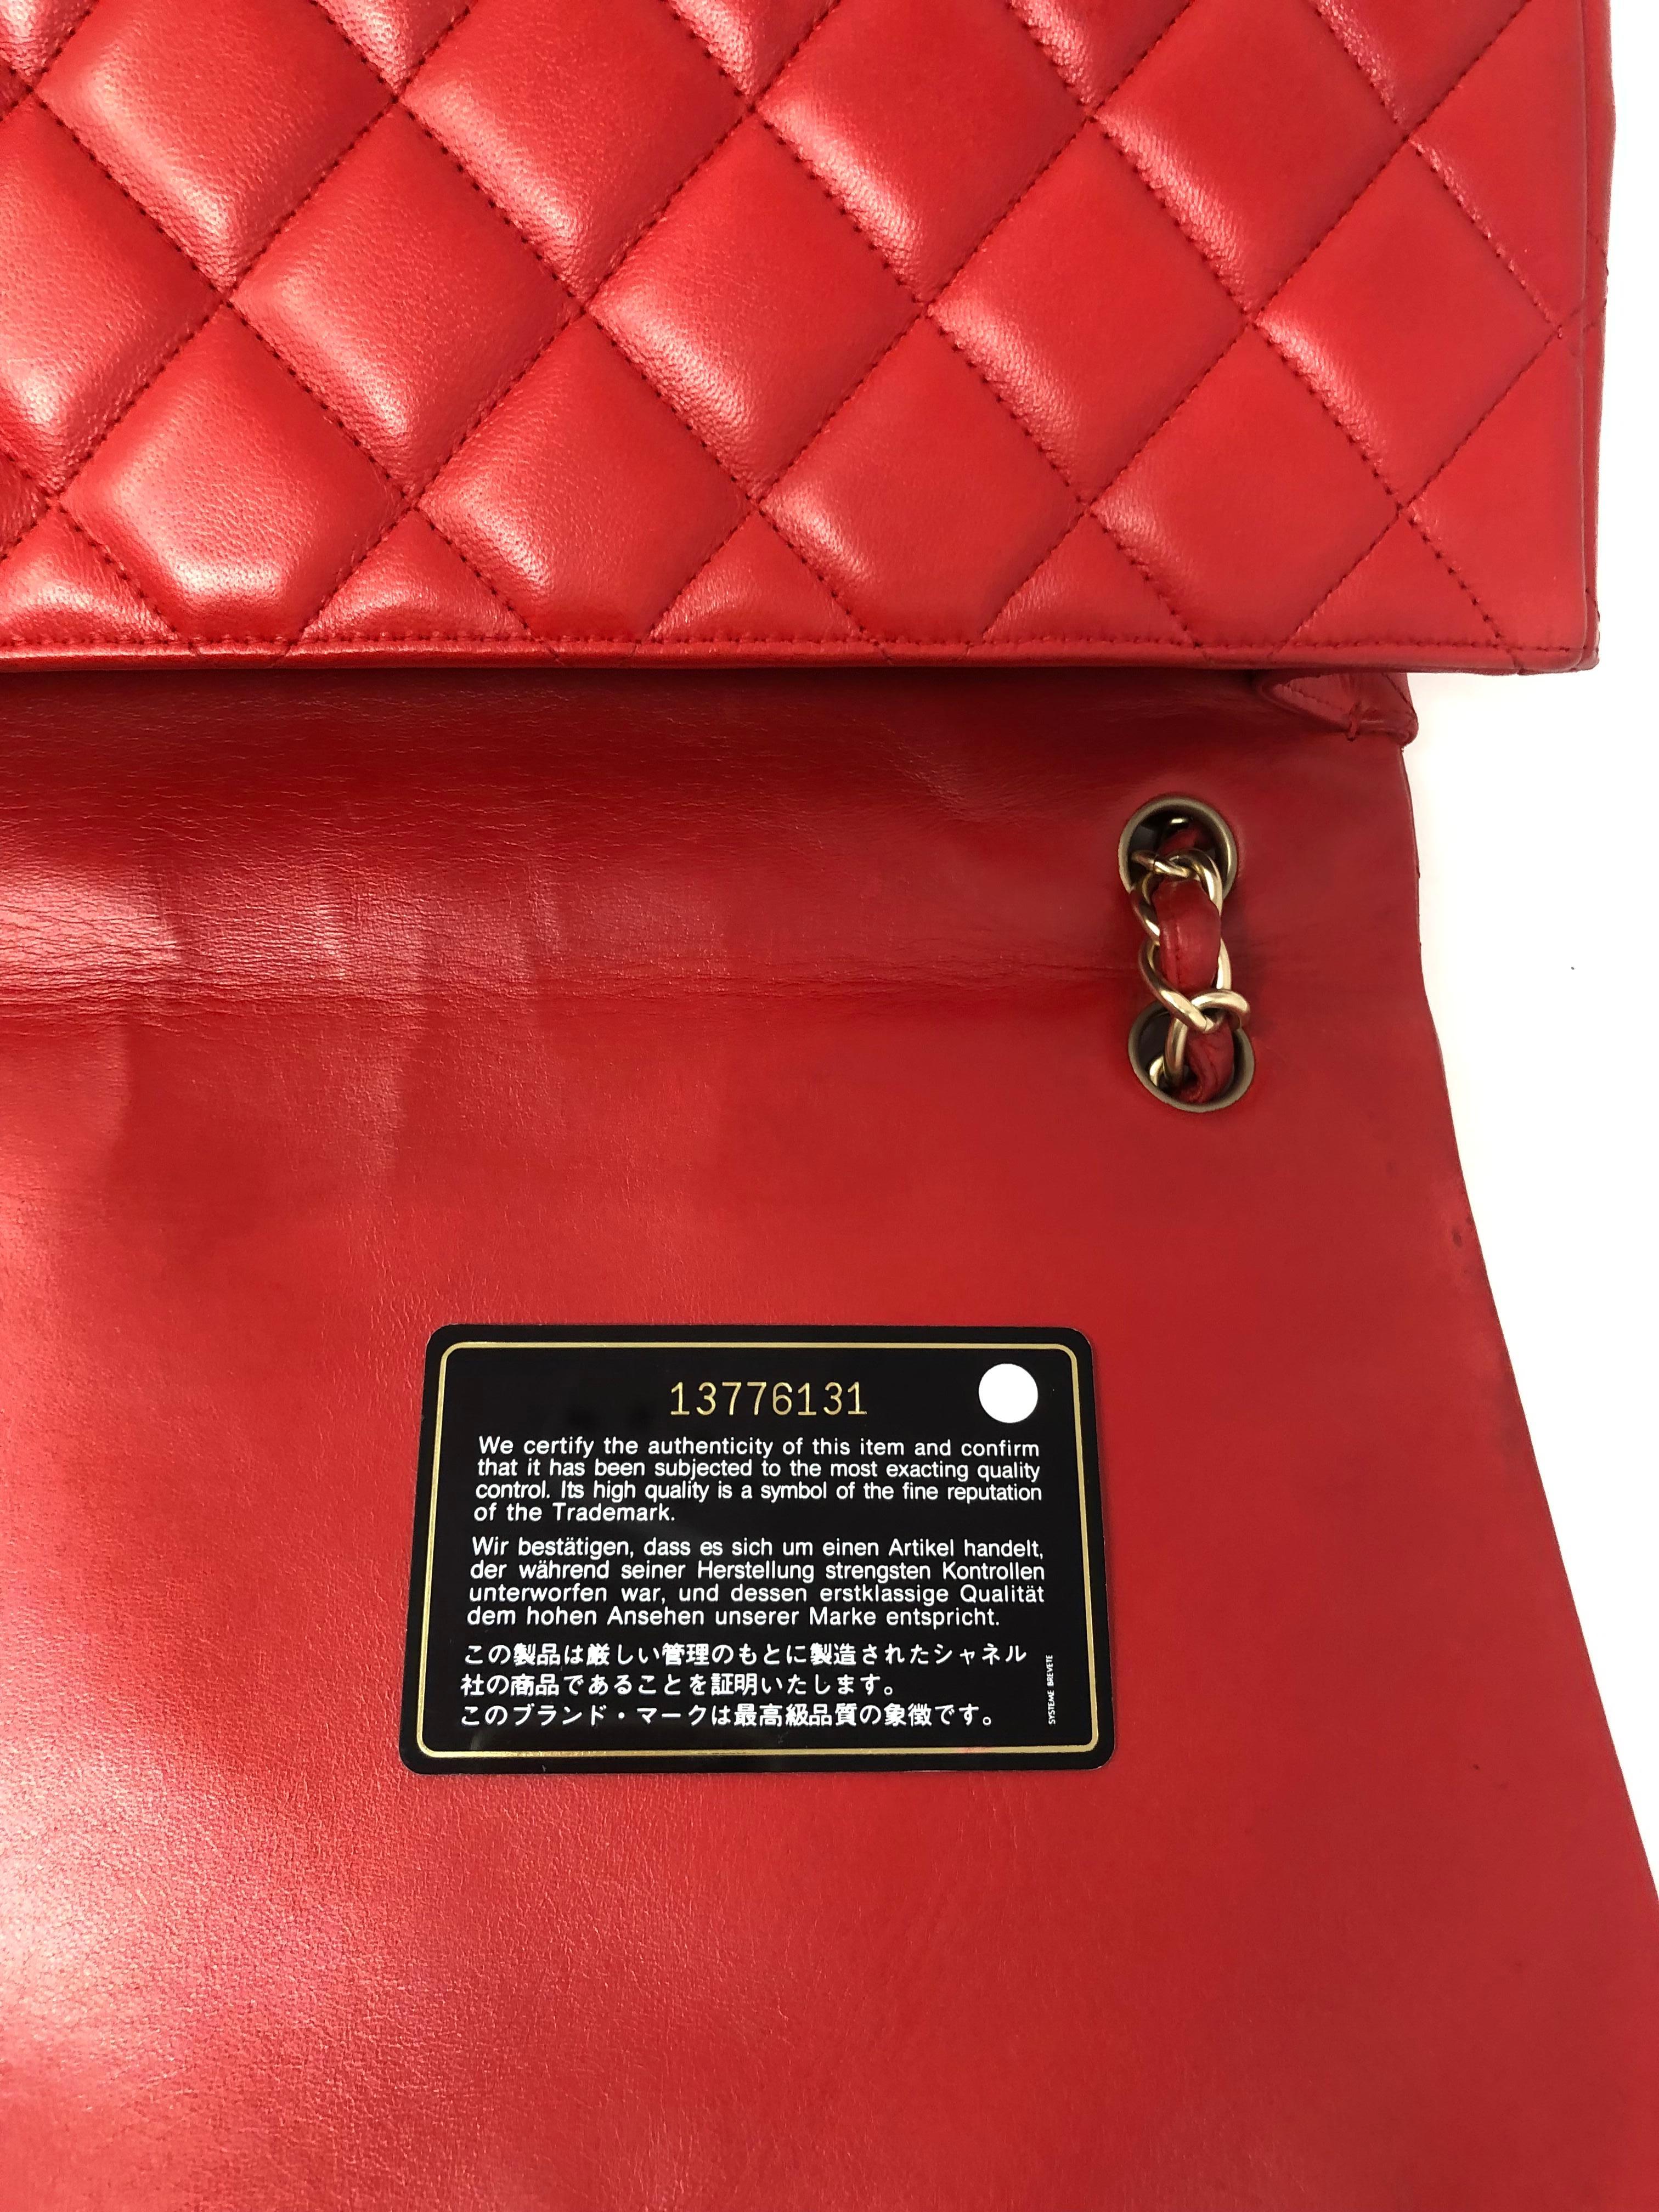 Chanel Red Maxi Bag 5